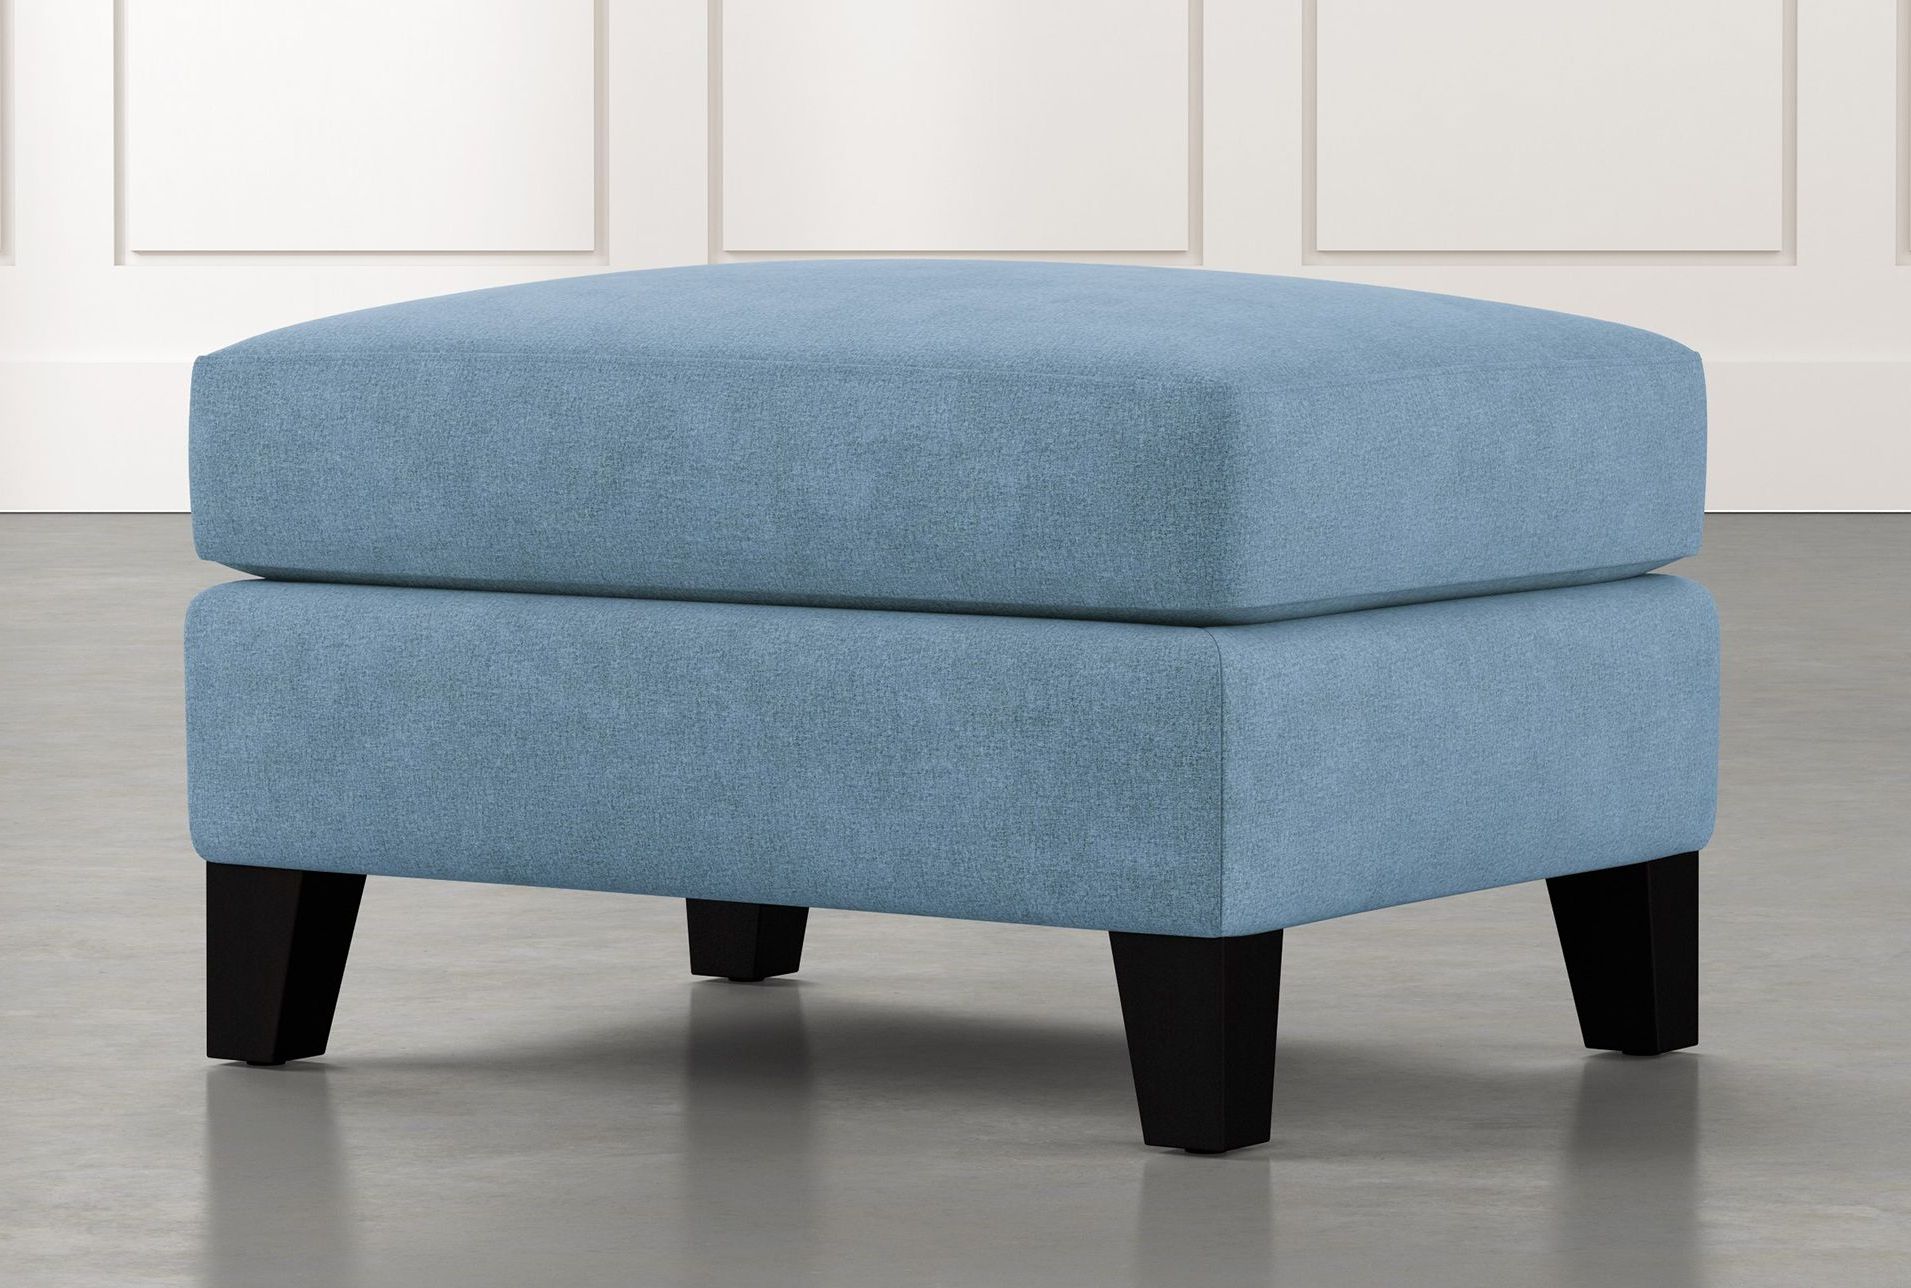 Popular Light Blue Cylinder Pouf Ottomans In Light Blue Square Ottoman (View 8 of 10)